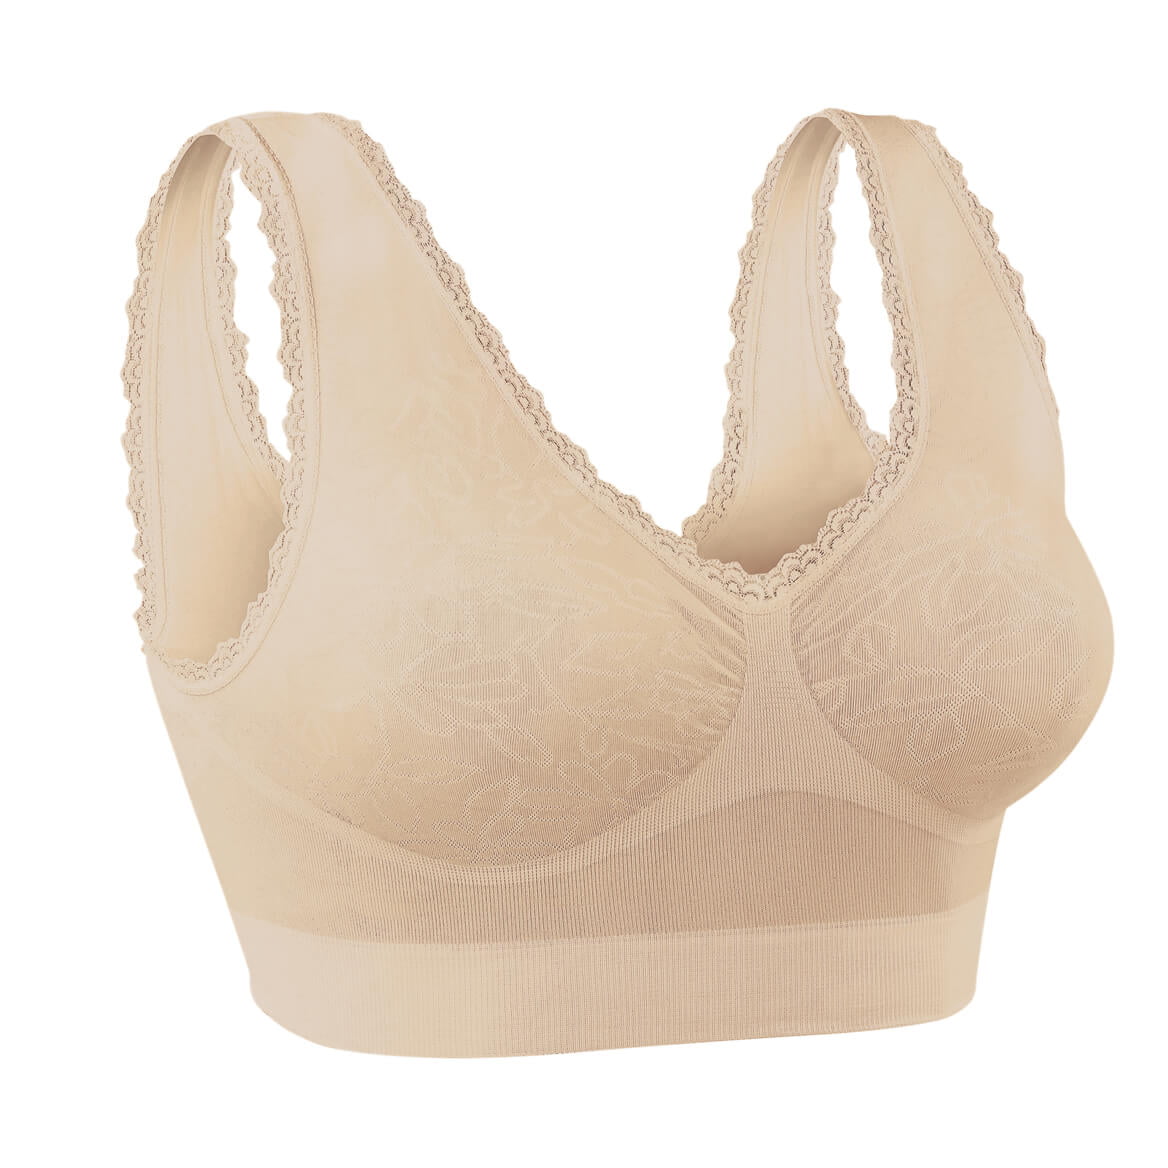 Smooth and Shape Lace Lingerie Bra, Size 44 Nude 